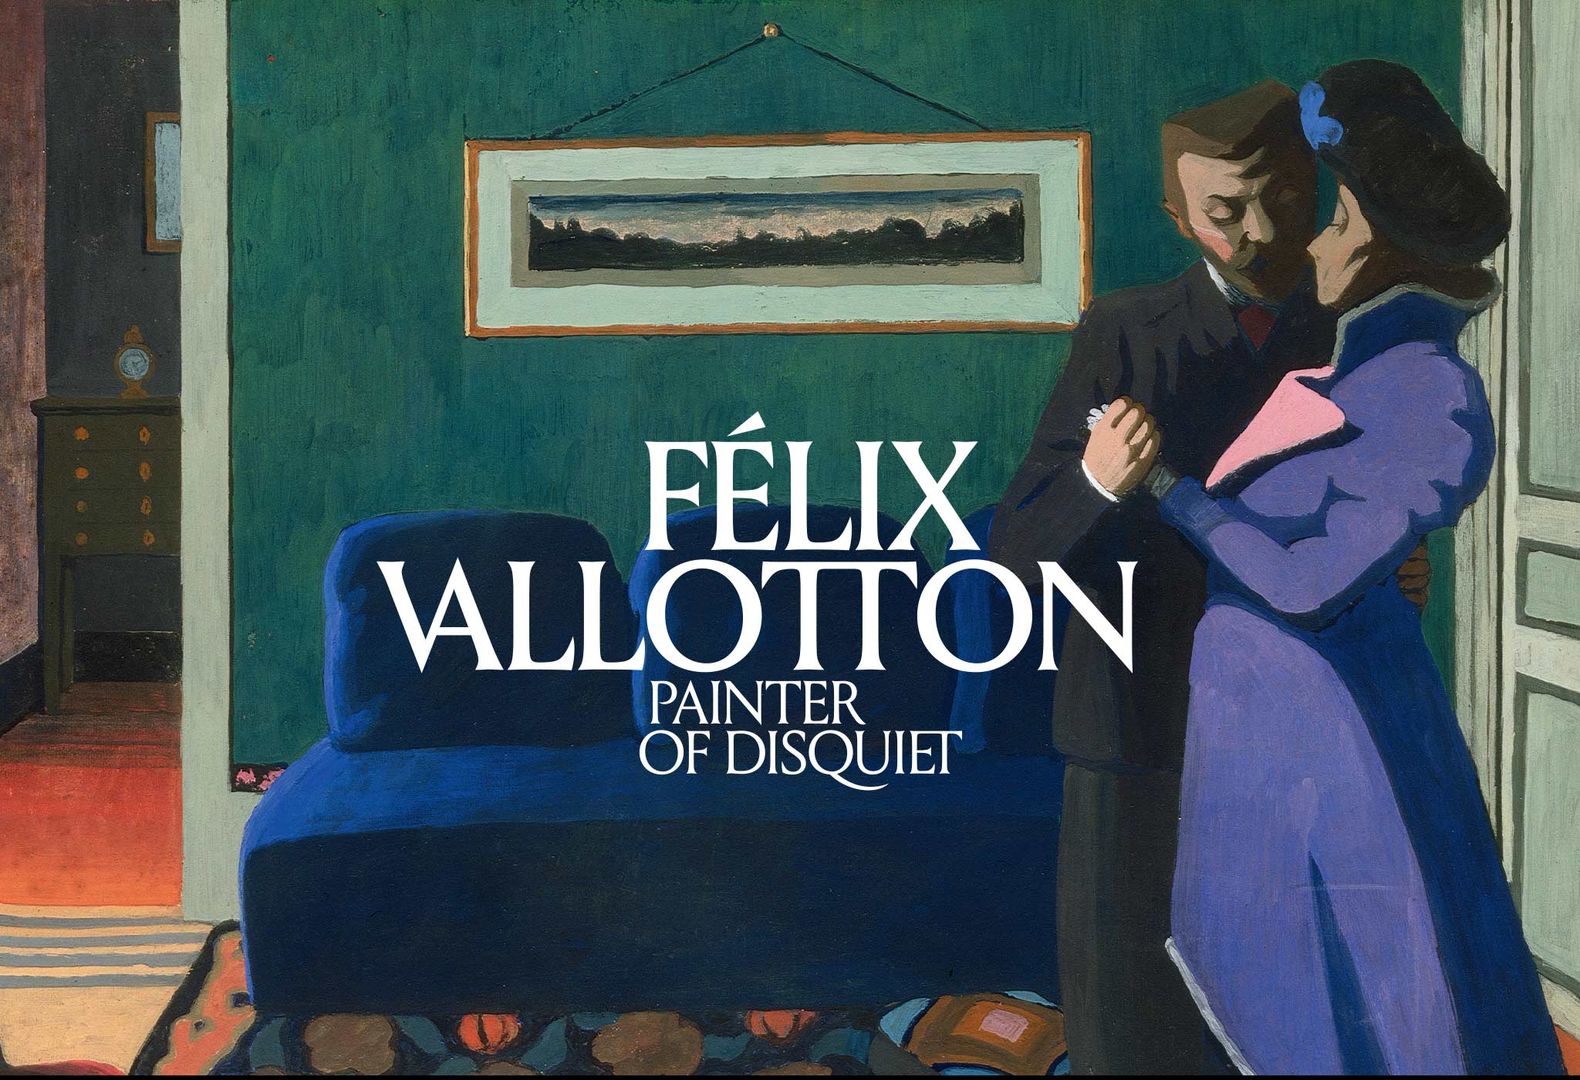 A painting of a man in a brown suit and a women in a purple dress, holding hands in a bourgeois interior, with green walls, an orange rug, and a blue couch